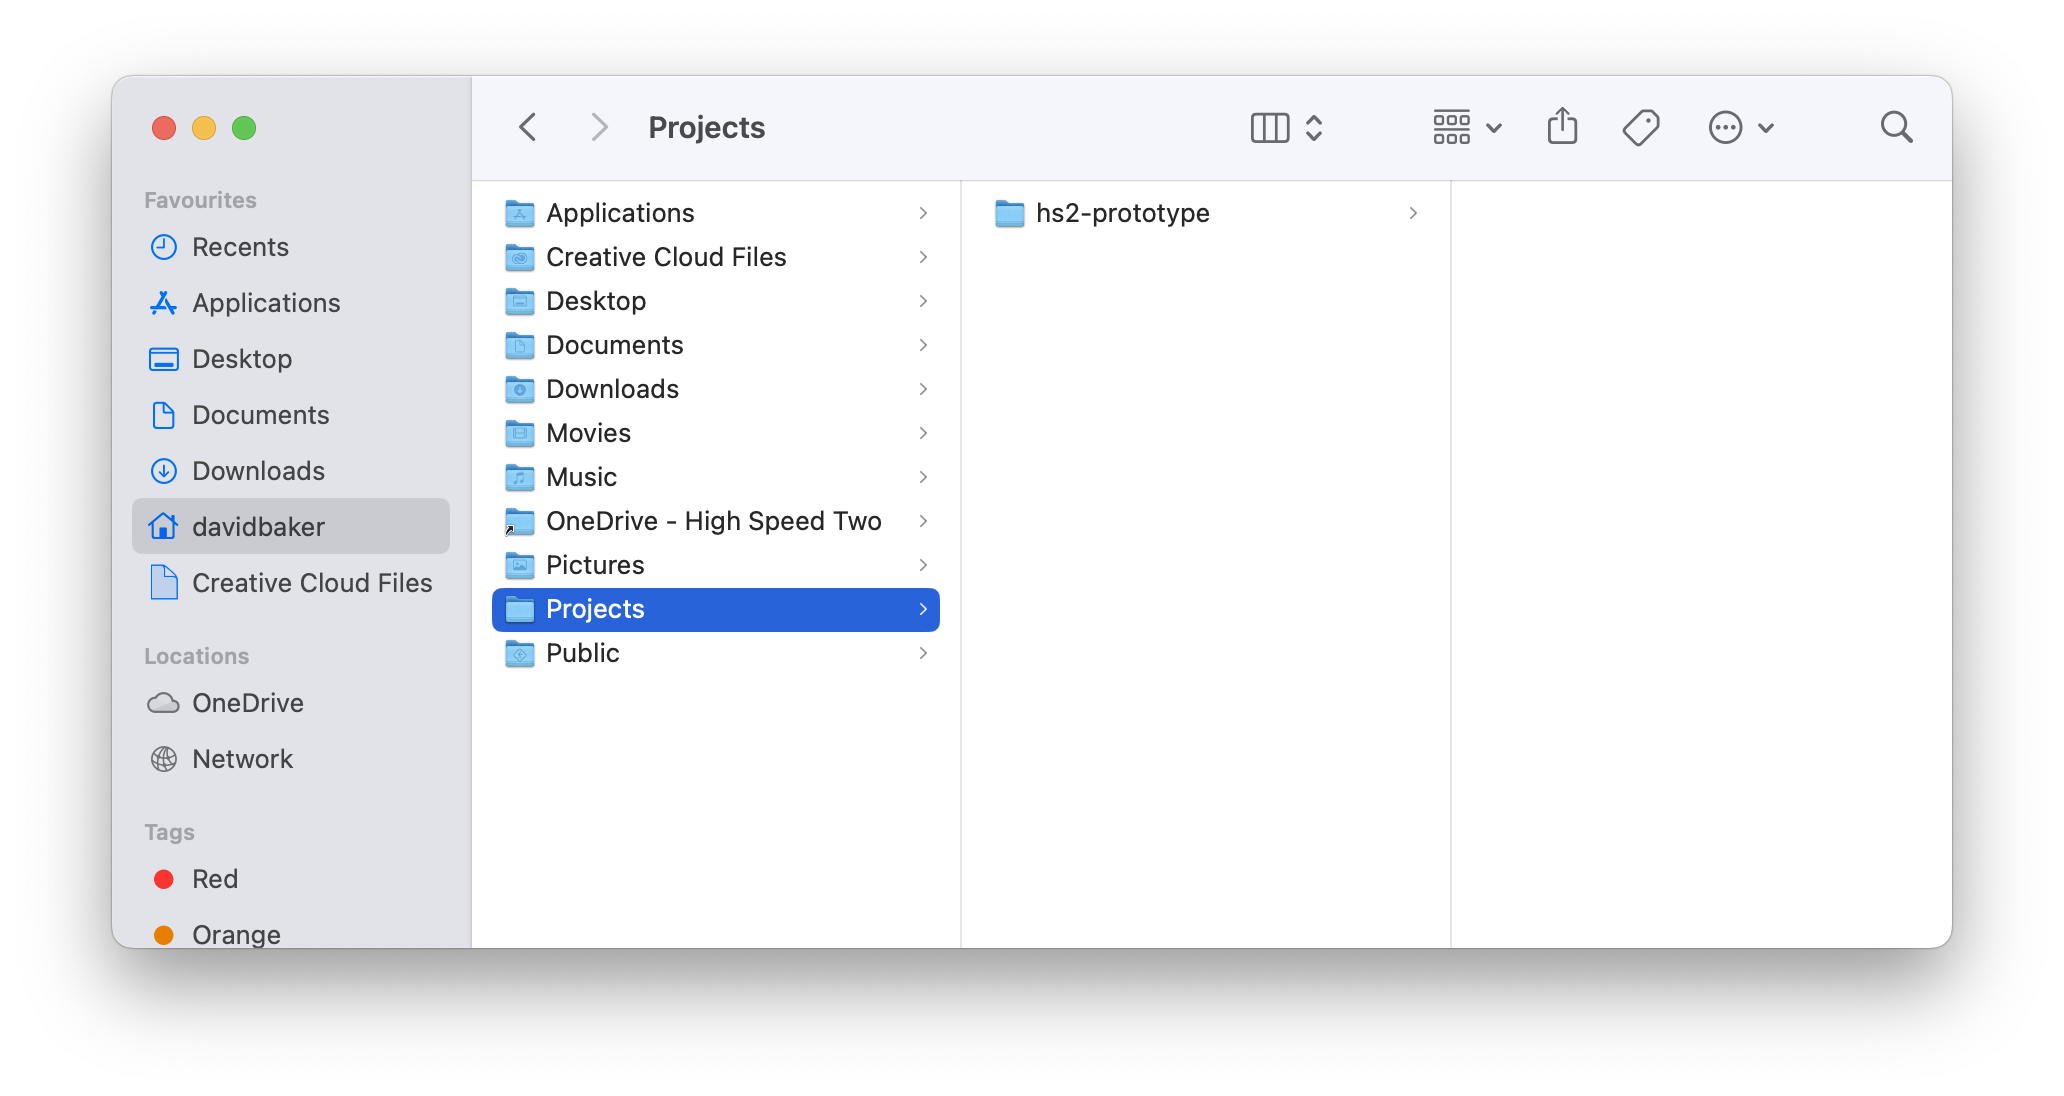 Screenshot of the projects folder